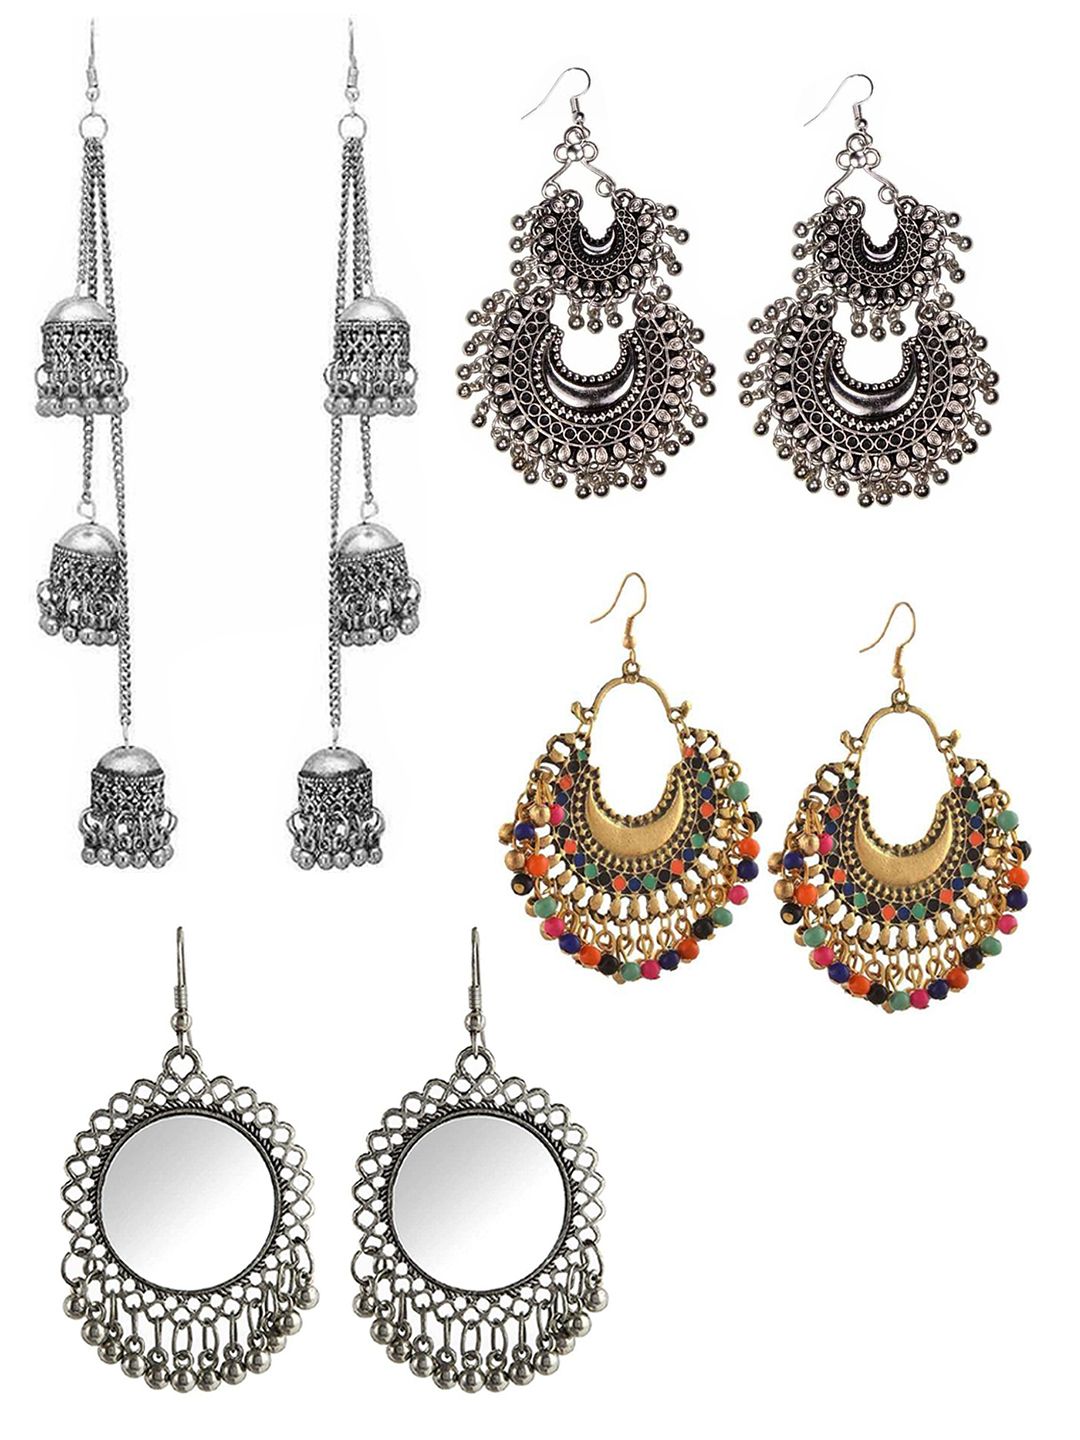 Vembley Silver-Toned Combo of 4 Jhumkas Earrings Price in India